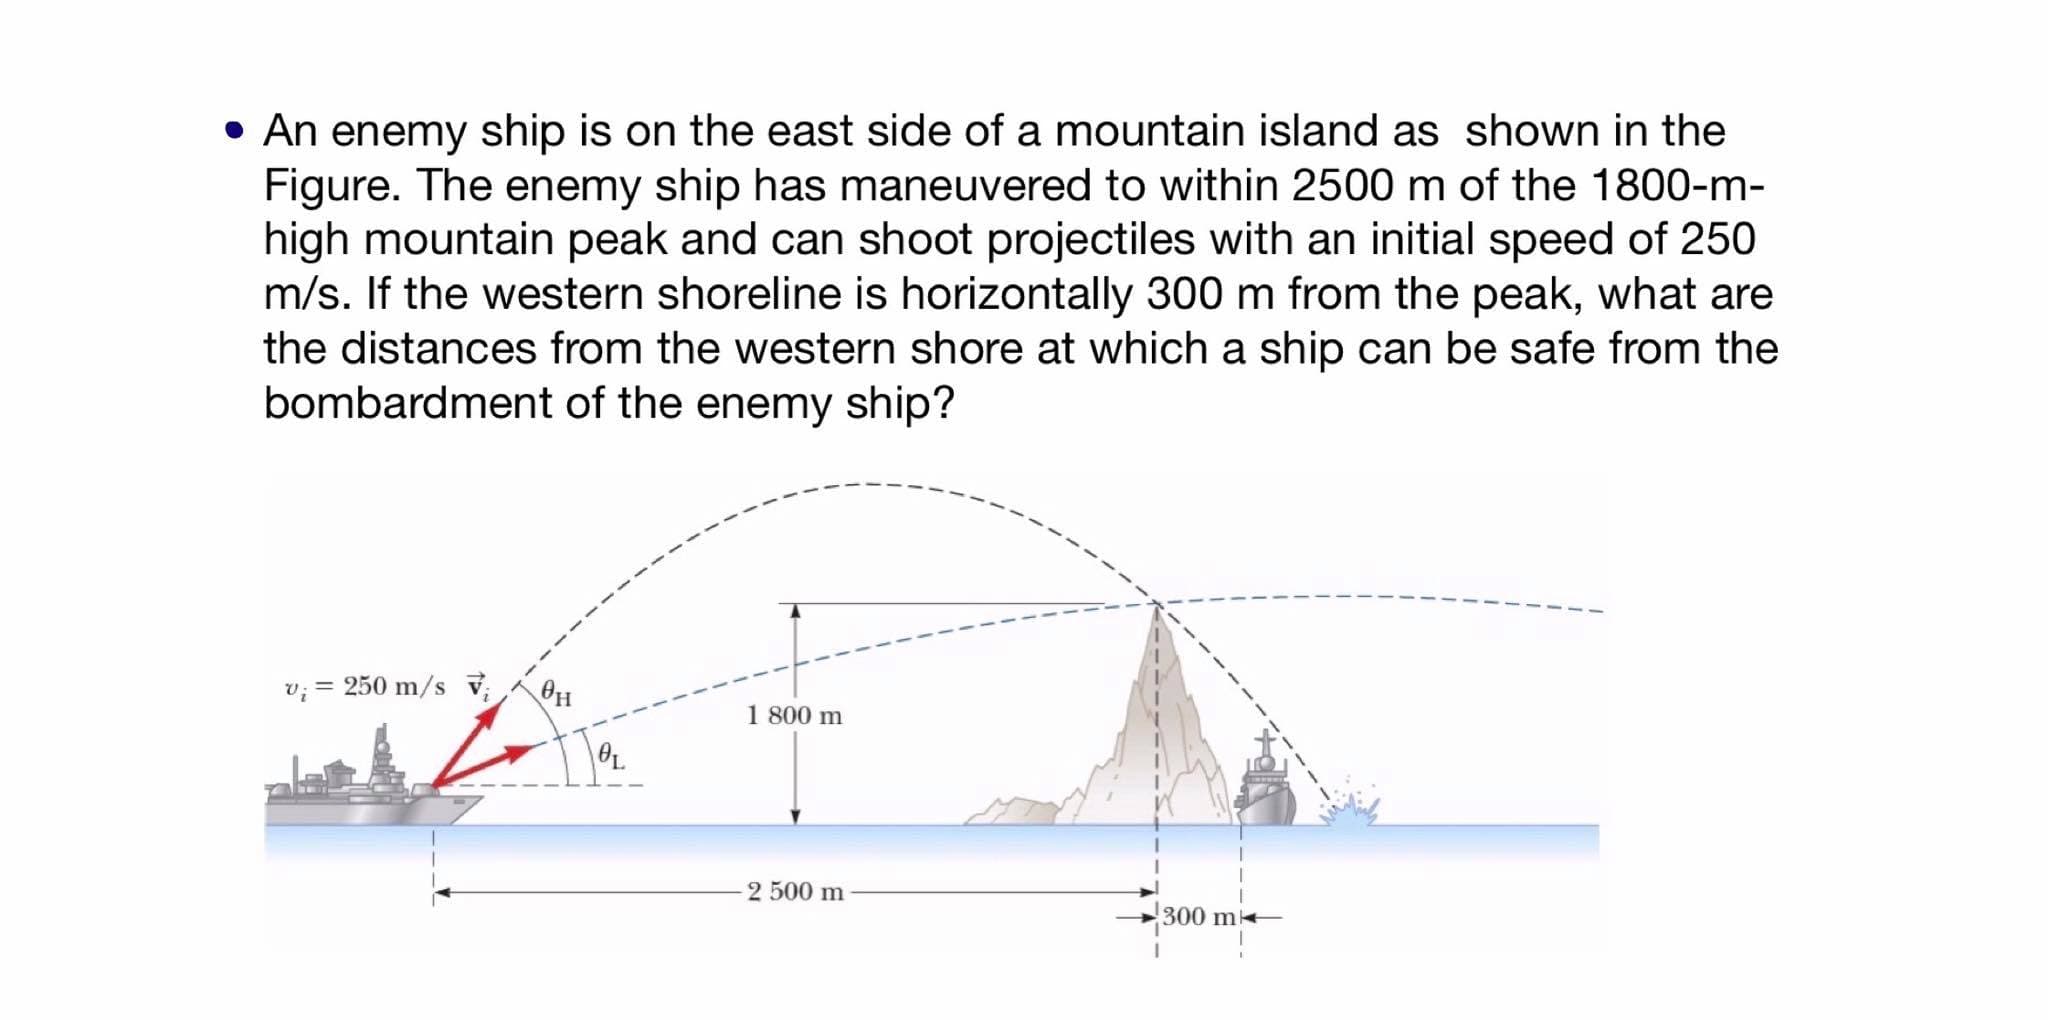 • An enemy ship is on the east side of a mountain island as shown in the
Figure. The enemy ship has maneuvered to within 2500 m of the 1800-m-
high mountain peak and can shoot projectiles with an initial speed of 250
m/s. If the western shoreline is horizontally 300 m from the peak, what are
the distances from the western shore at which a ship can be safe from the
bombardment of the enemy ship?
v; = 250 m/s v,
1 800 m
2 500 m
300 m
